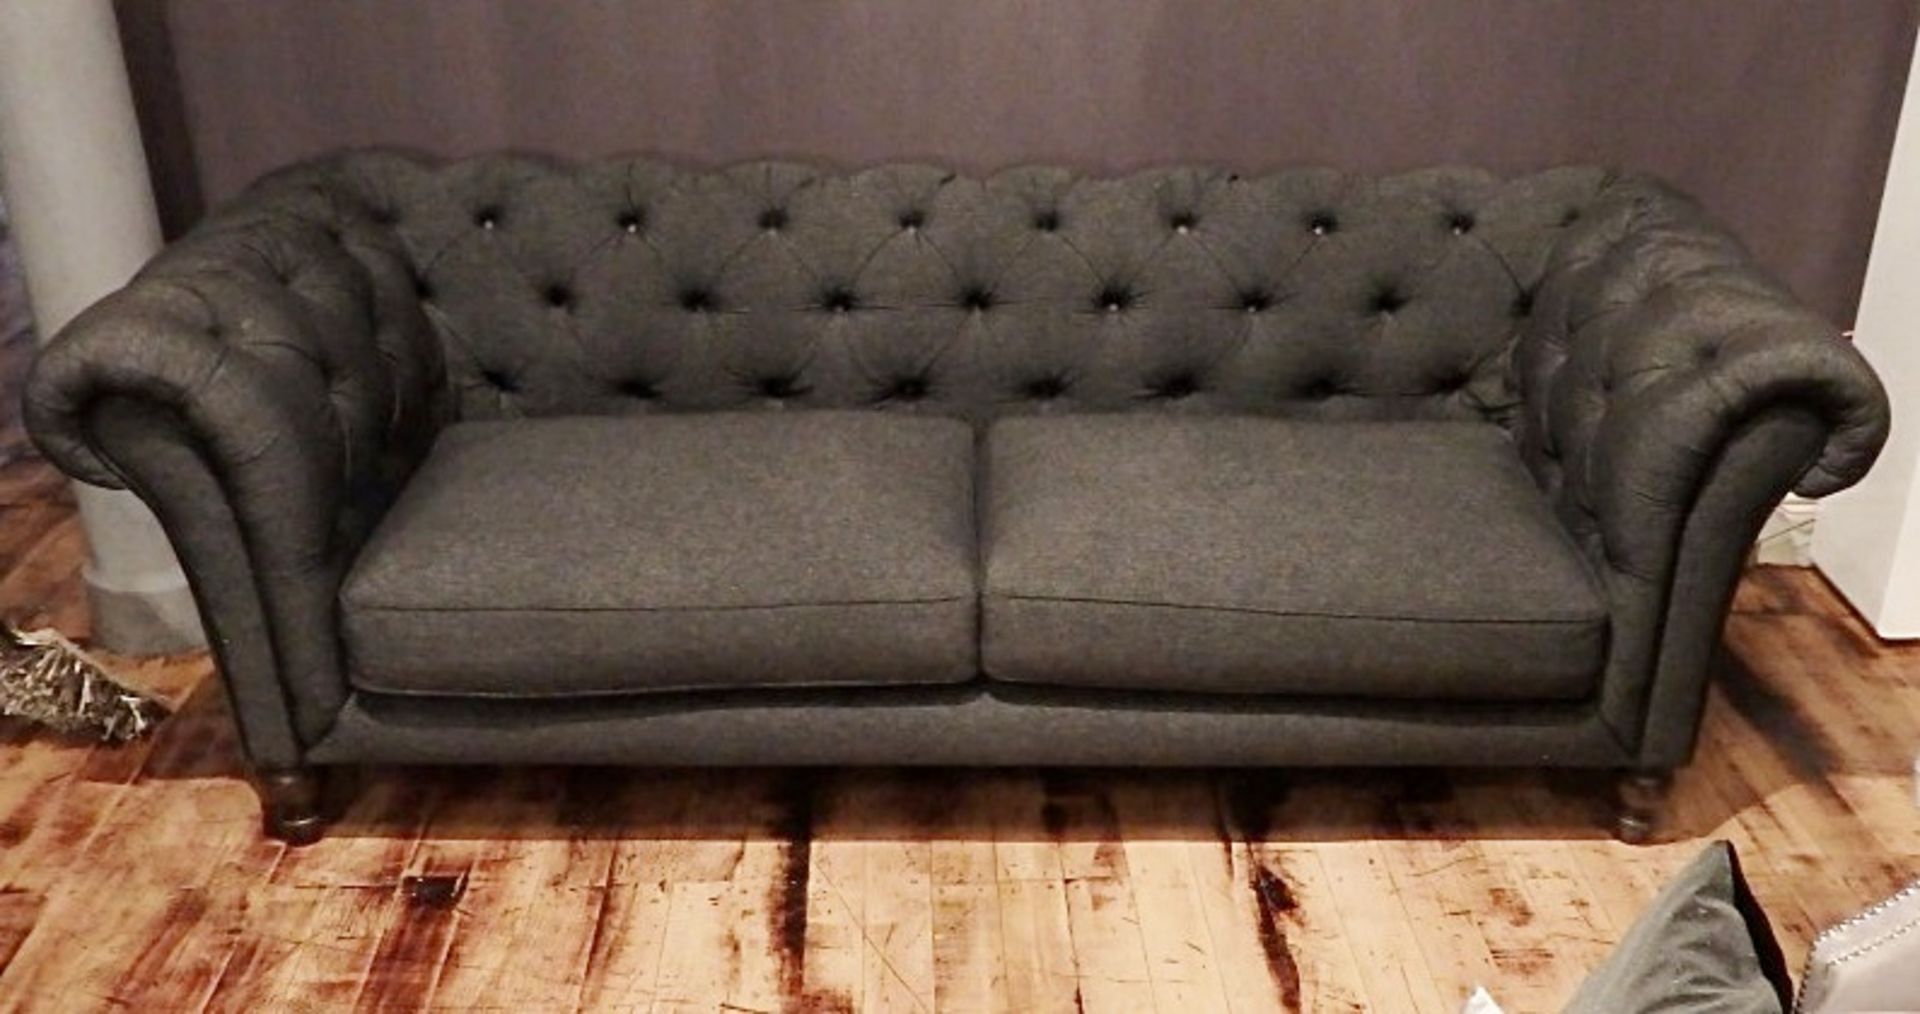 1 x Button-Back Grand Sofa - Upholstered In Contempoary Black Fabric - Dimensions: W210 x H65 x - Image 3 of 4